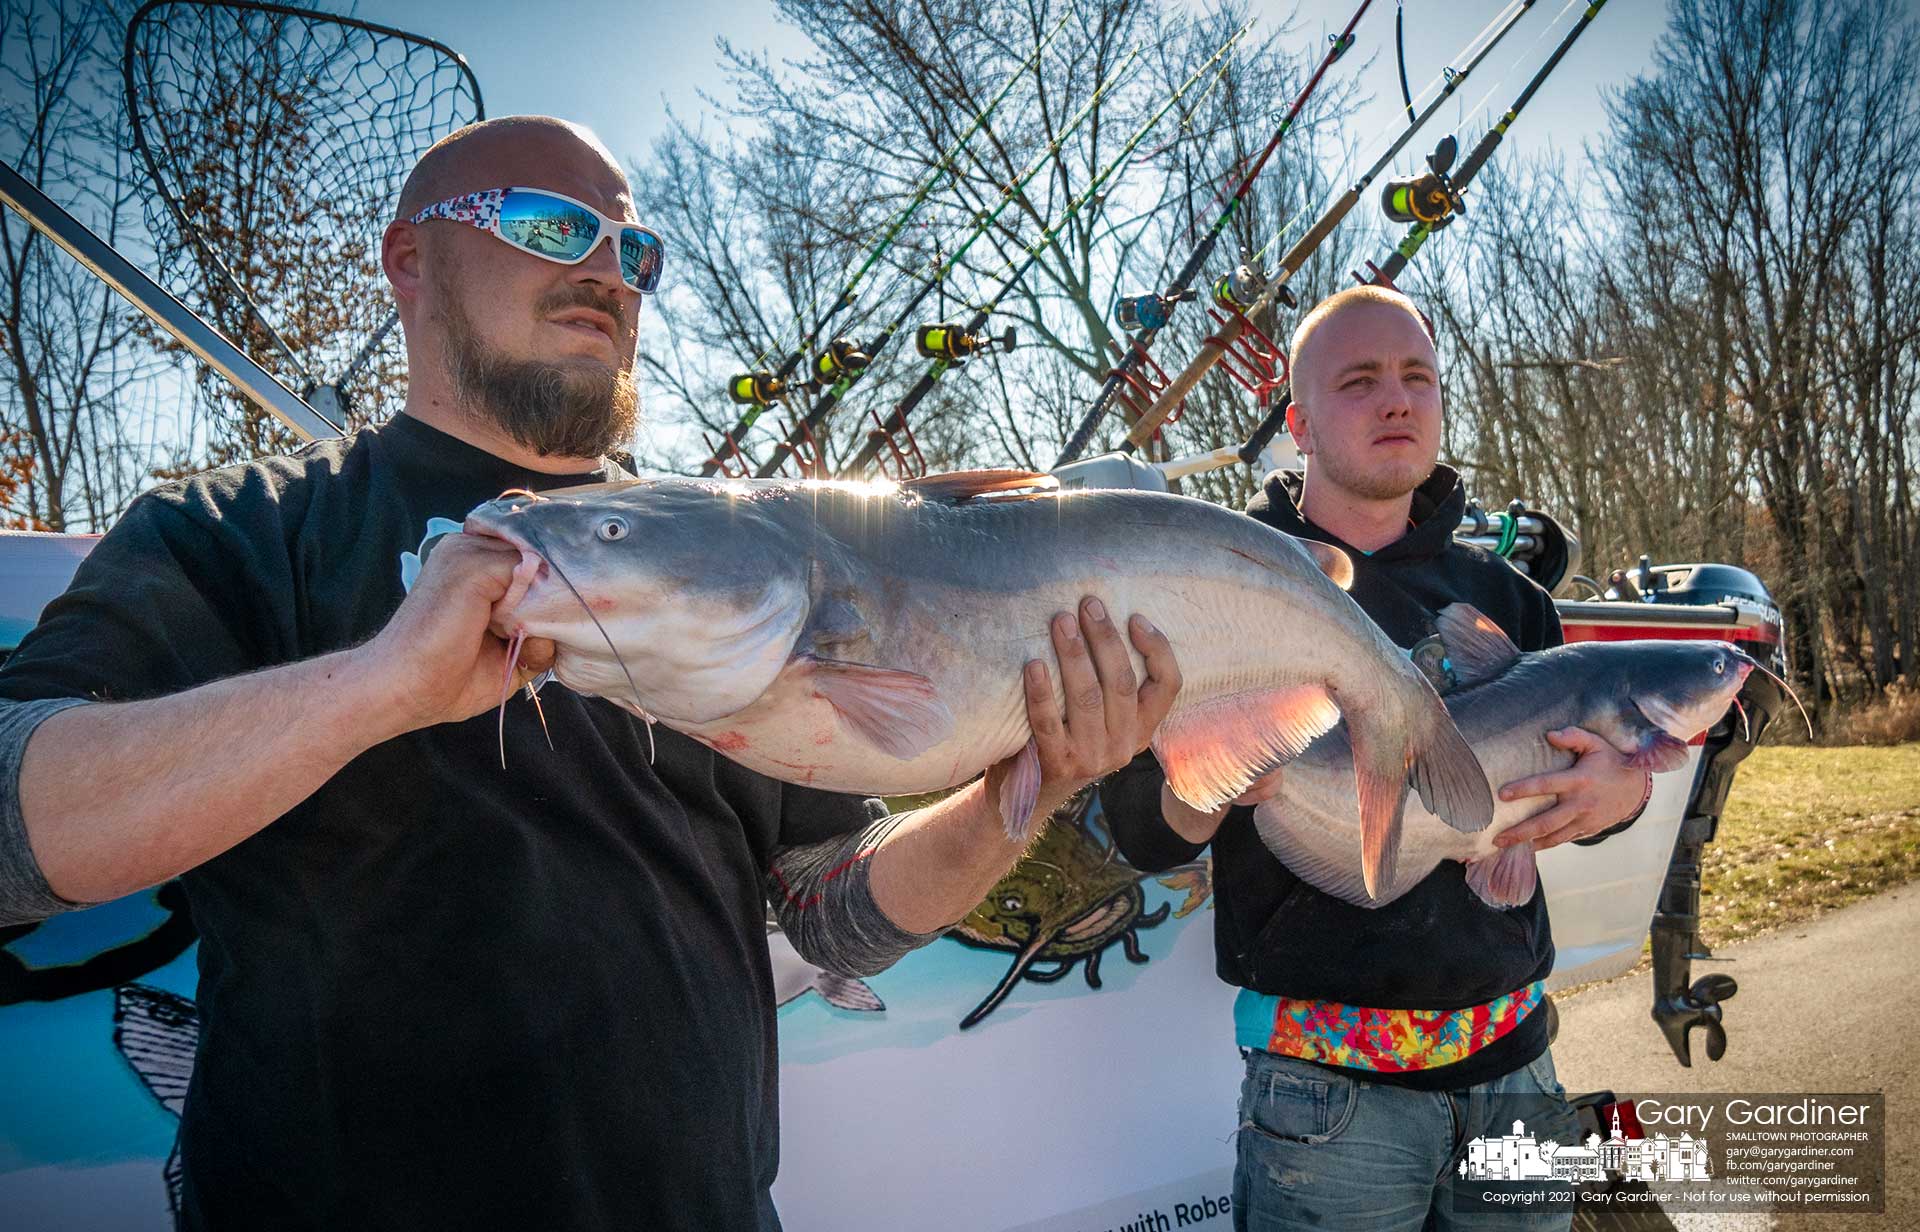 Fishermen hold more than 36 pounds of catfish pulled from Hoover Reservoir Saturday making the two fish the largest aggregate catch of the afternoon. My Final Photo for March 20, 2021.